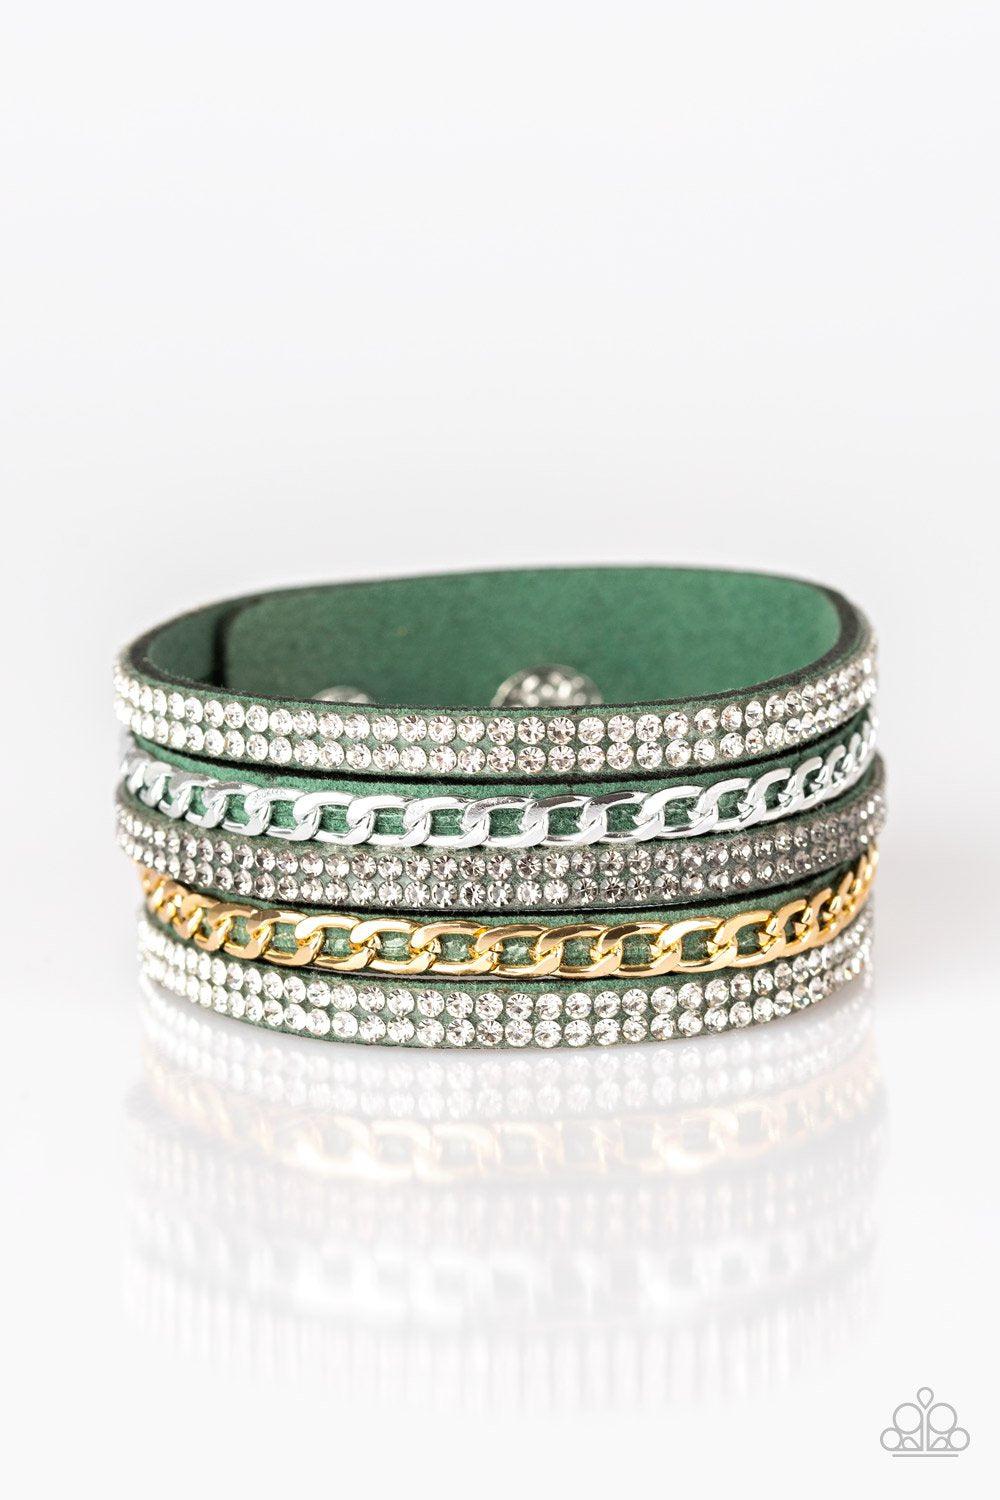 Fashion Fiend Green, Silver and Gold Urban Wrap Snap Bracelet - Paparazzi Accessories